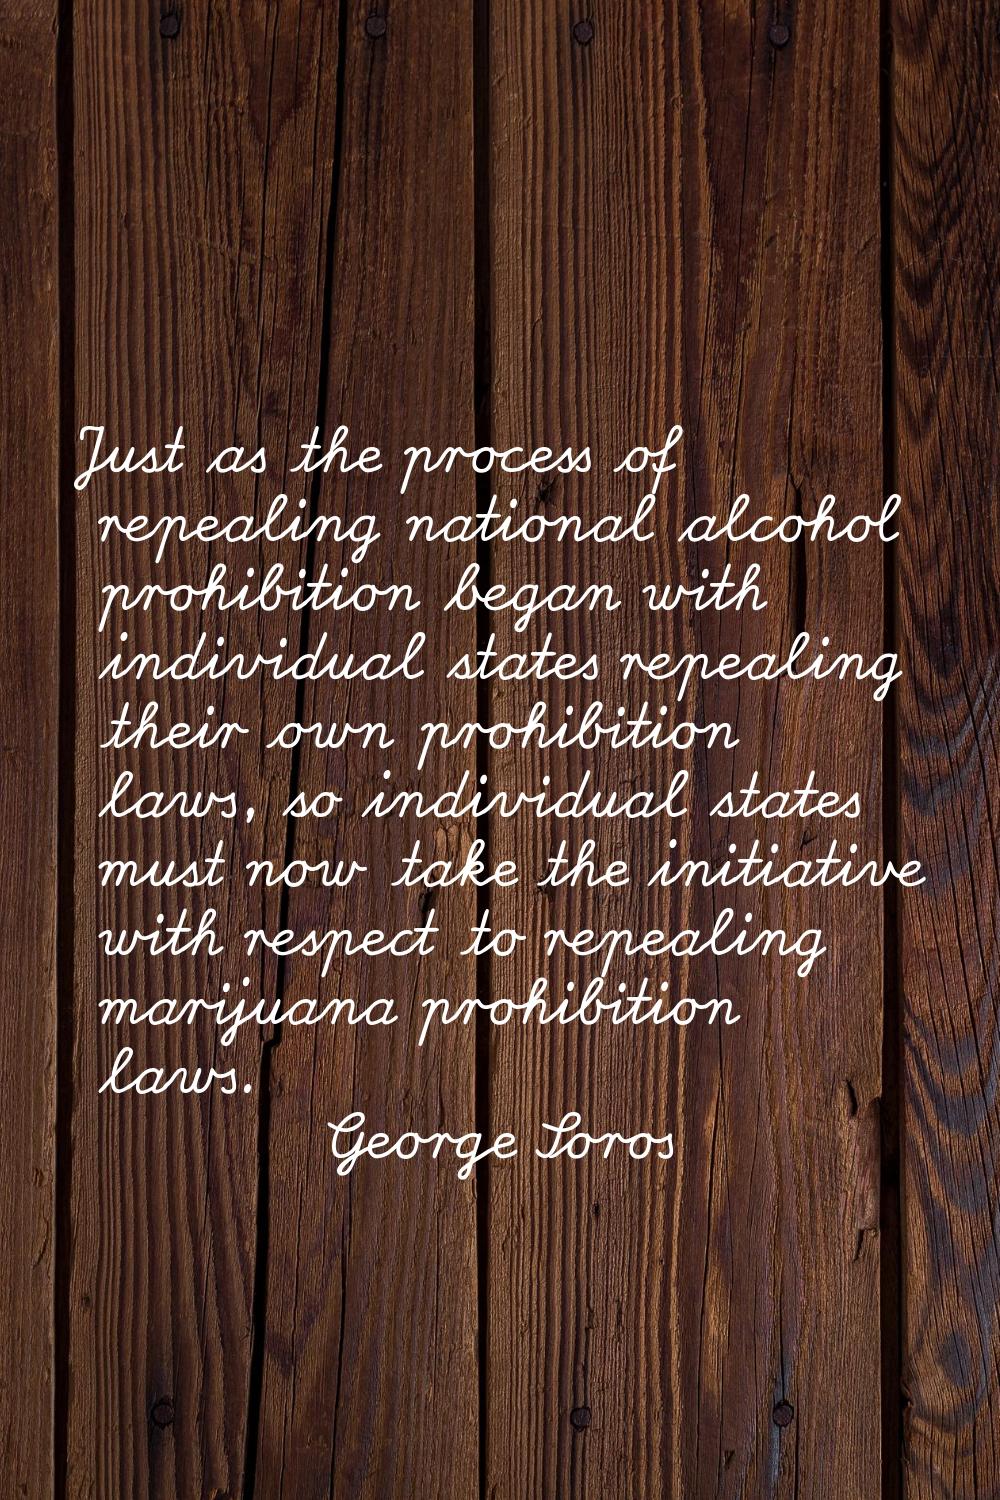 Just as the process of repealing national alcohol prohibition began with individual states repealin